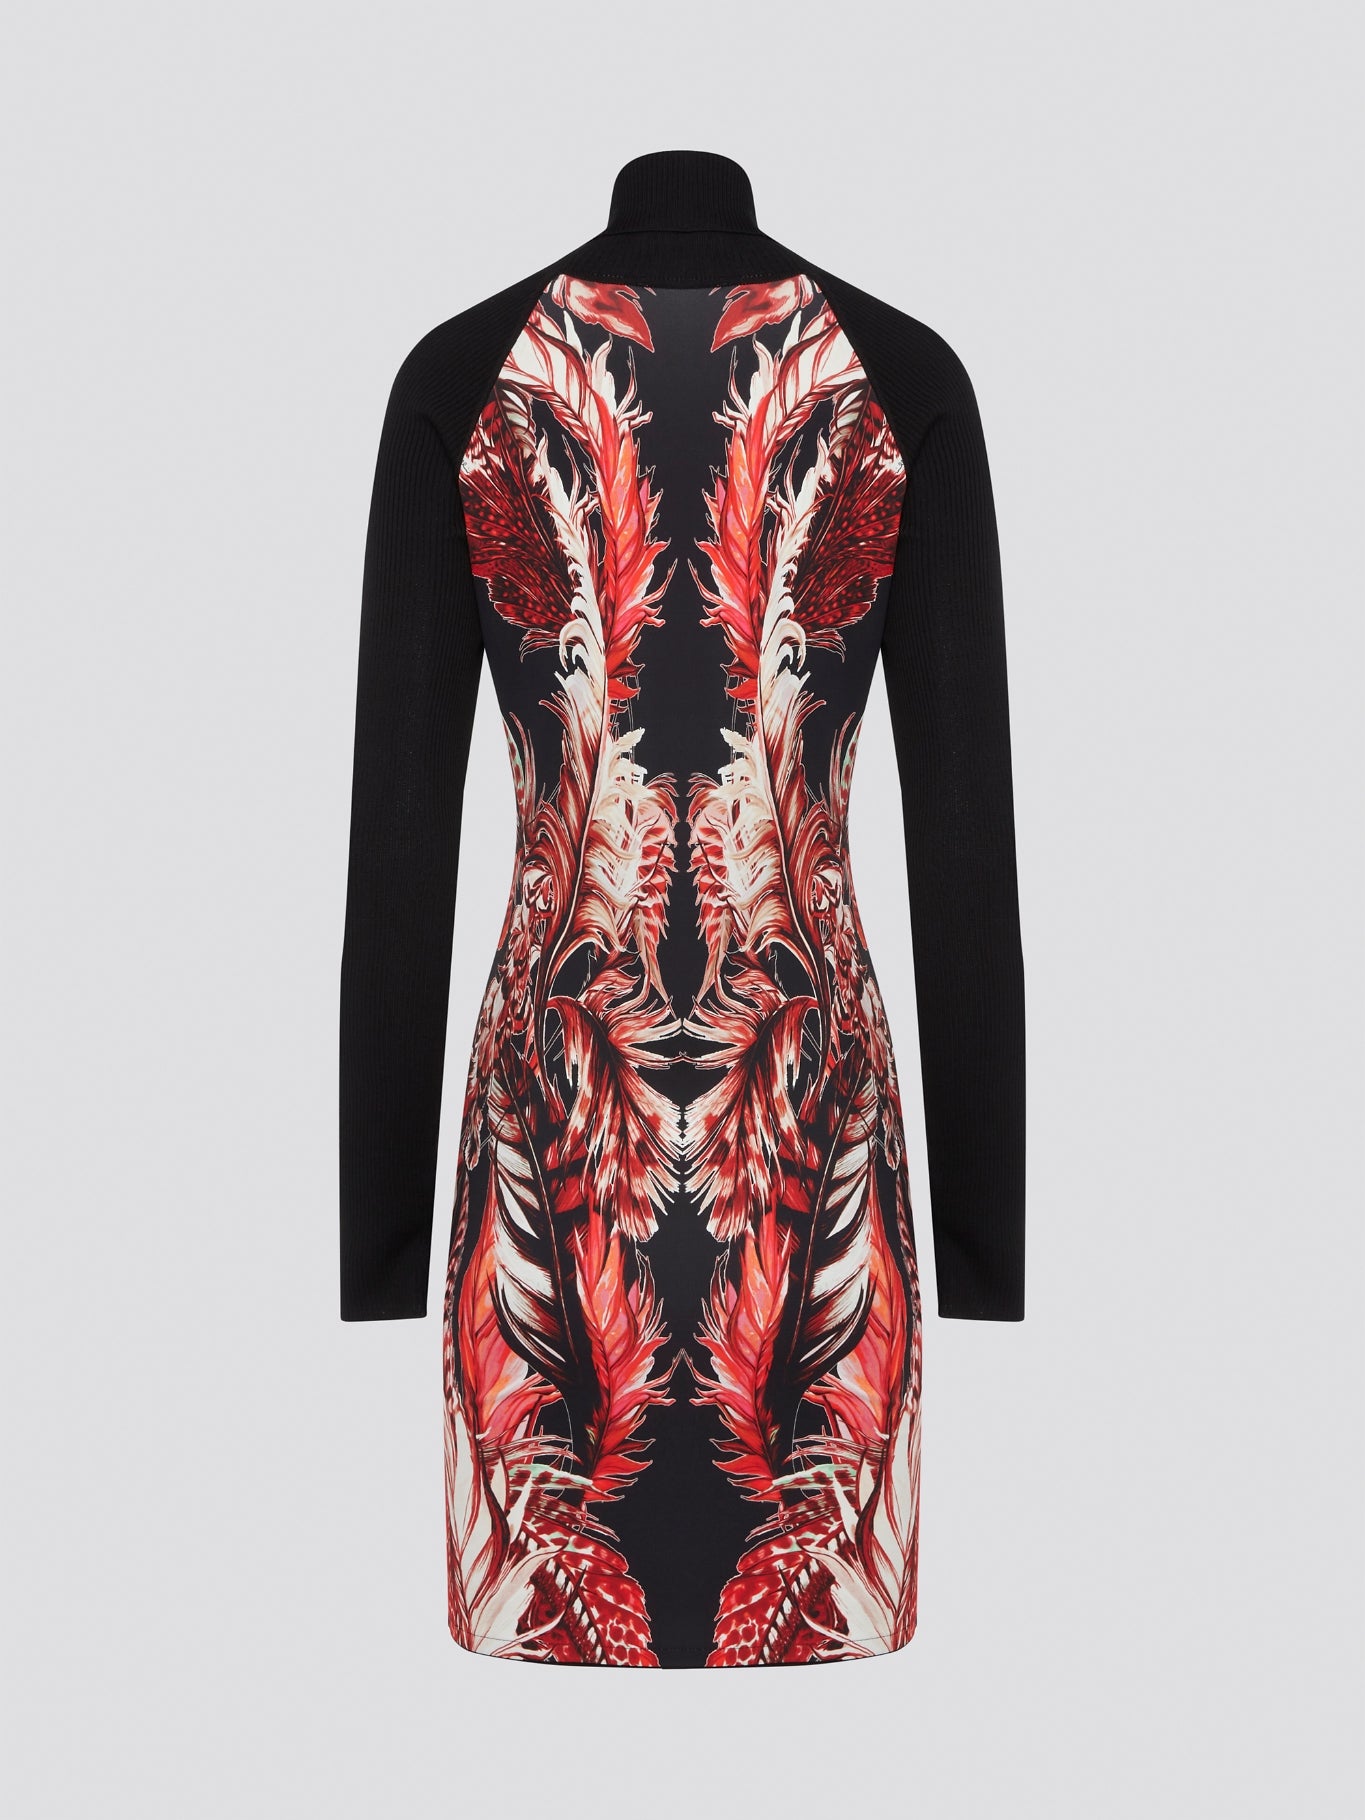 Elevate your wardrobe with the timeless sophistication of this Roberto Cavalli Printed Turtleneck Dress. Perfect for any occasion, this dress features a striking print that exudes luxury and style. With its figure-flattering silhouette and elegant turtleneck design, you'll turn heads wherever you go in this must-have piece.